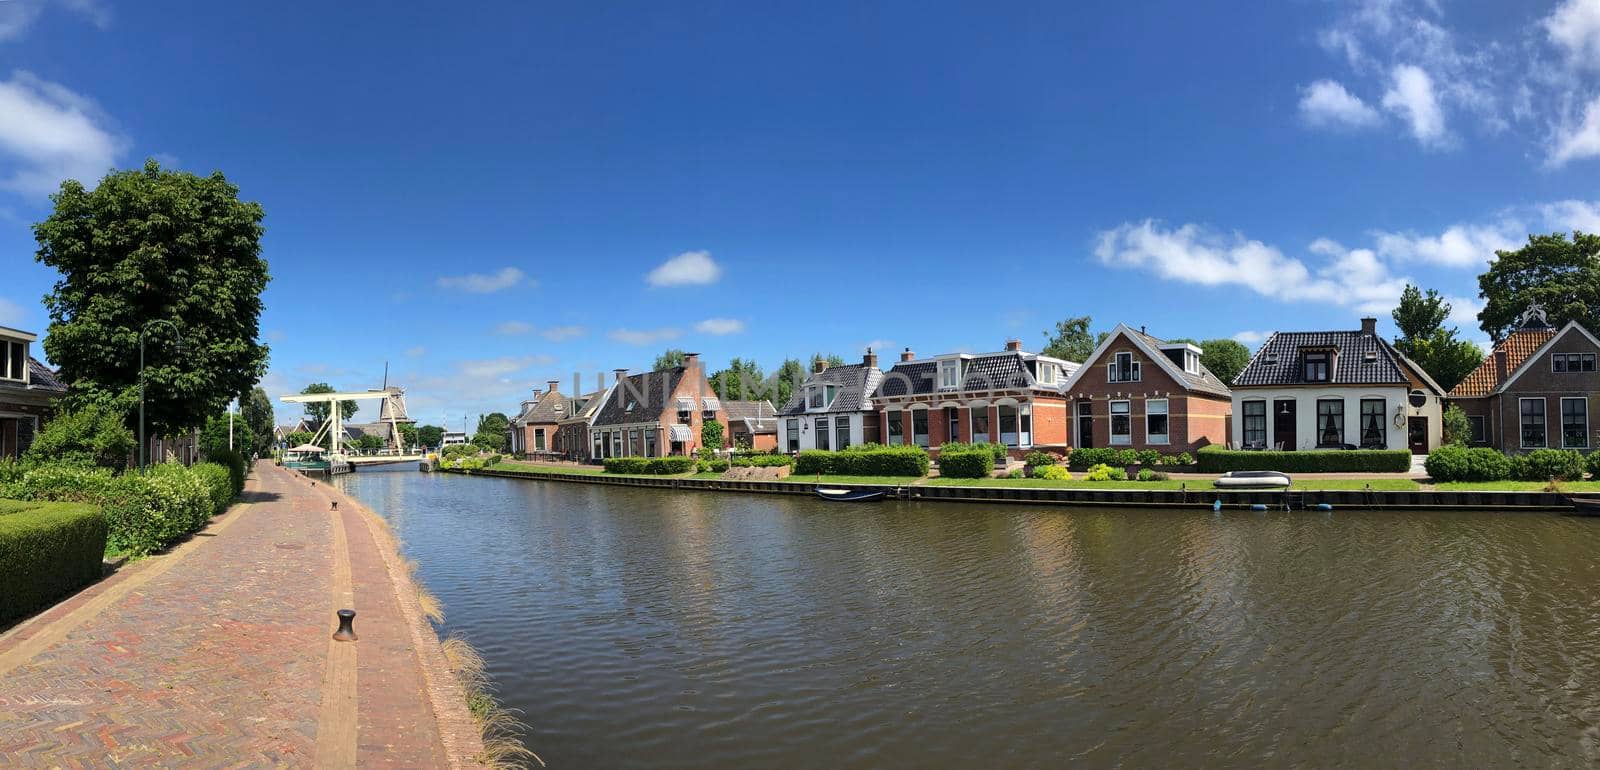 Panorama from the town Burdaard in Friesland The Netherlands